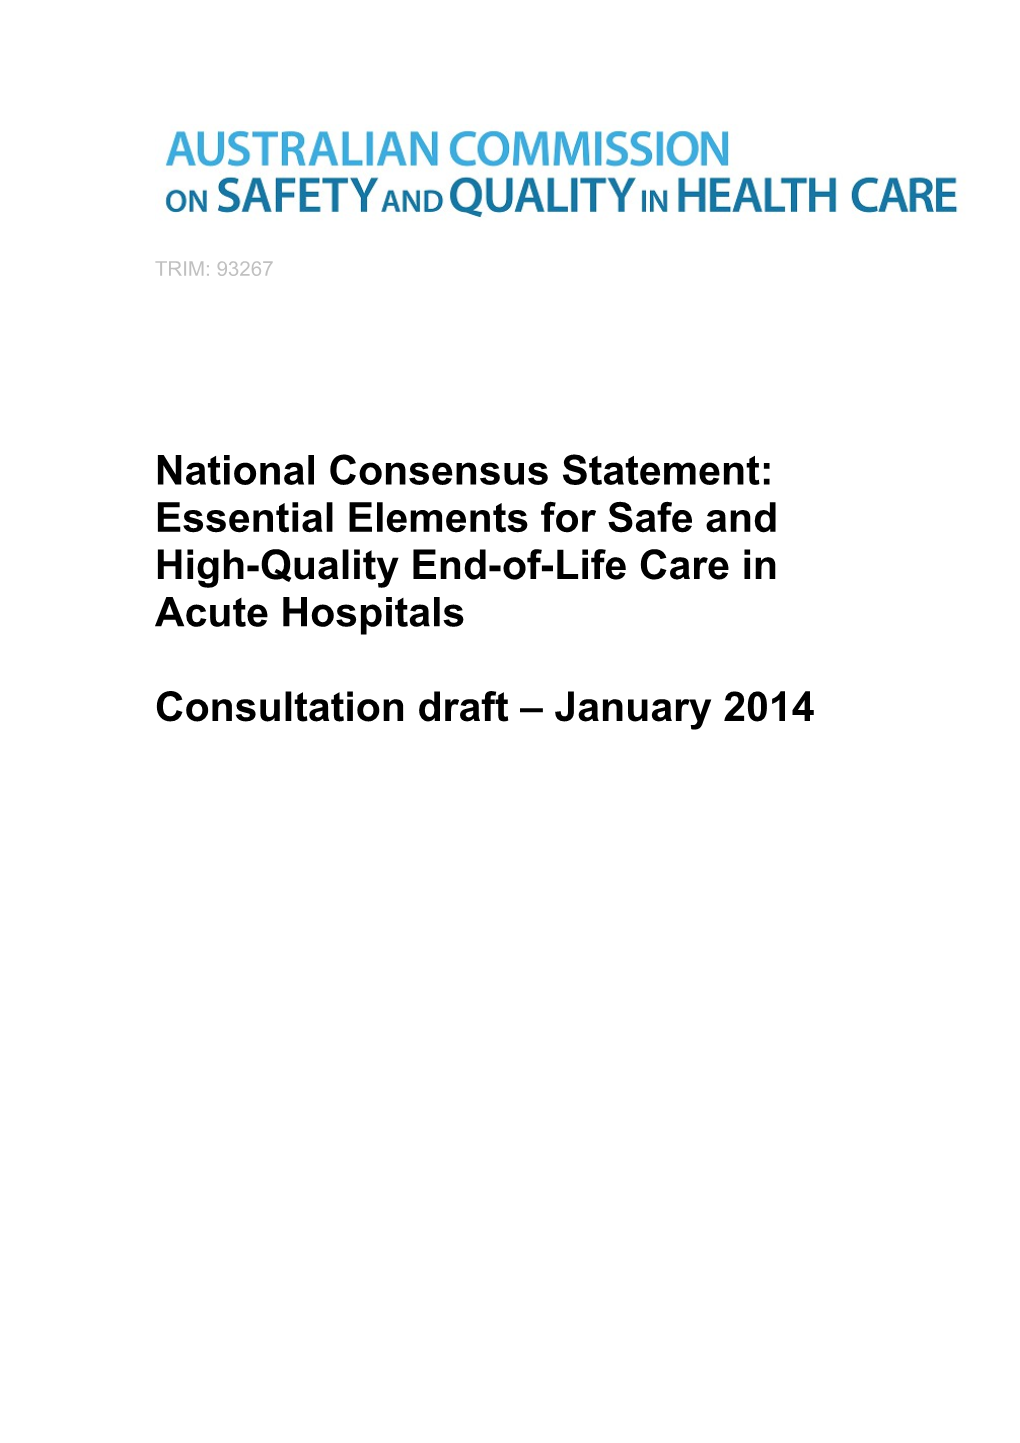 National Consensus Statement: Essential Elements for Safe and High-Quality End-Of-Life